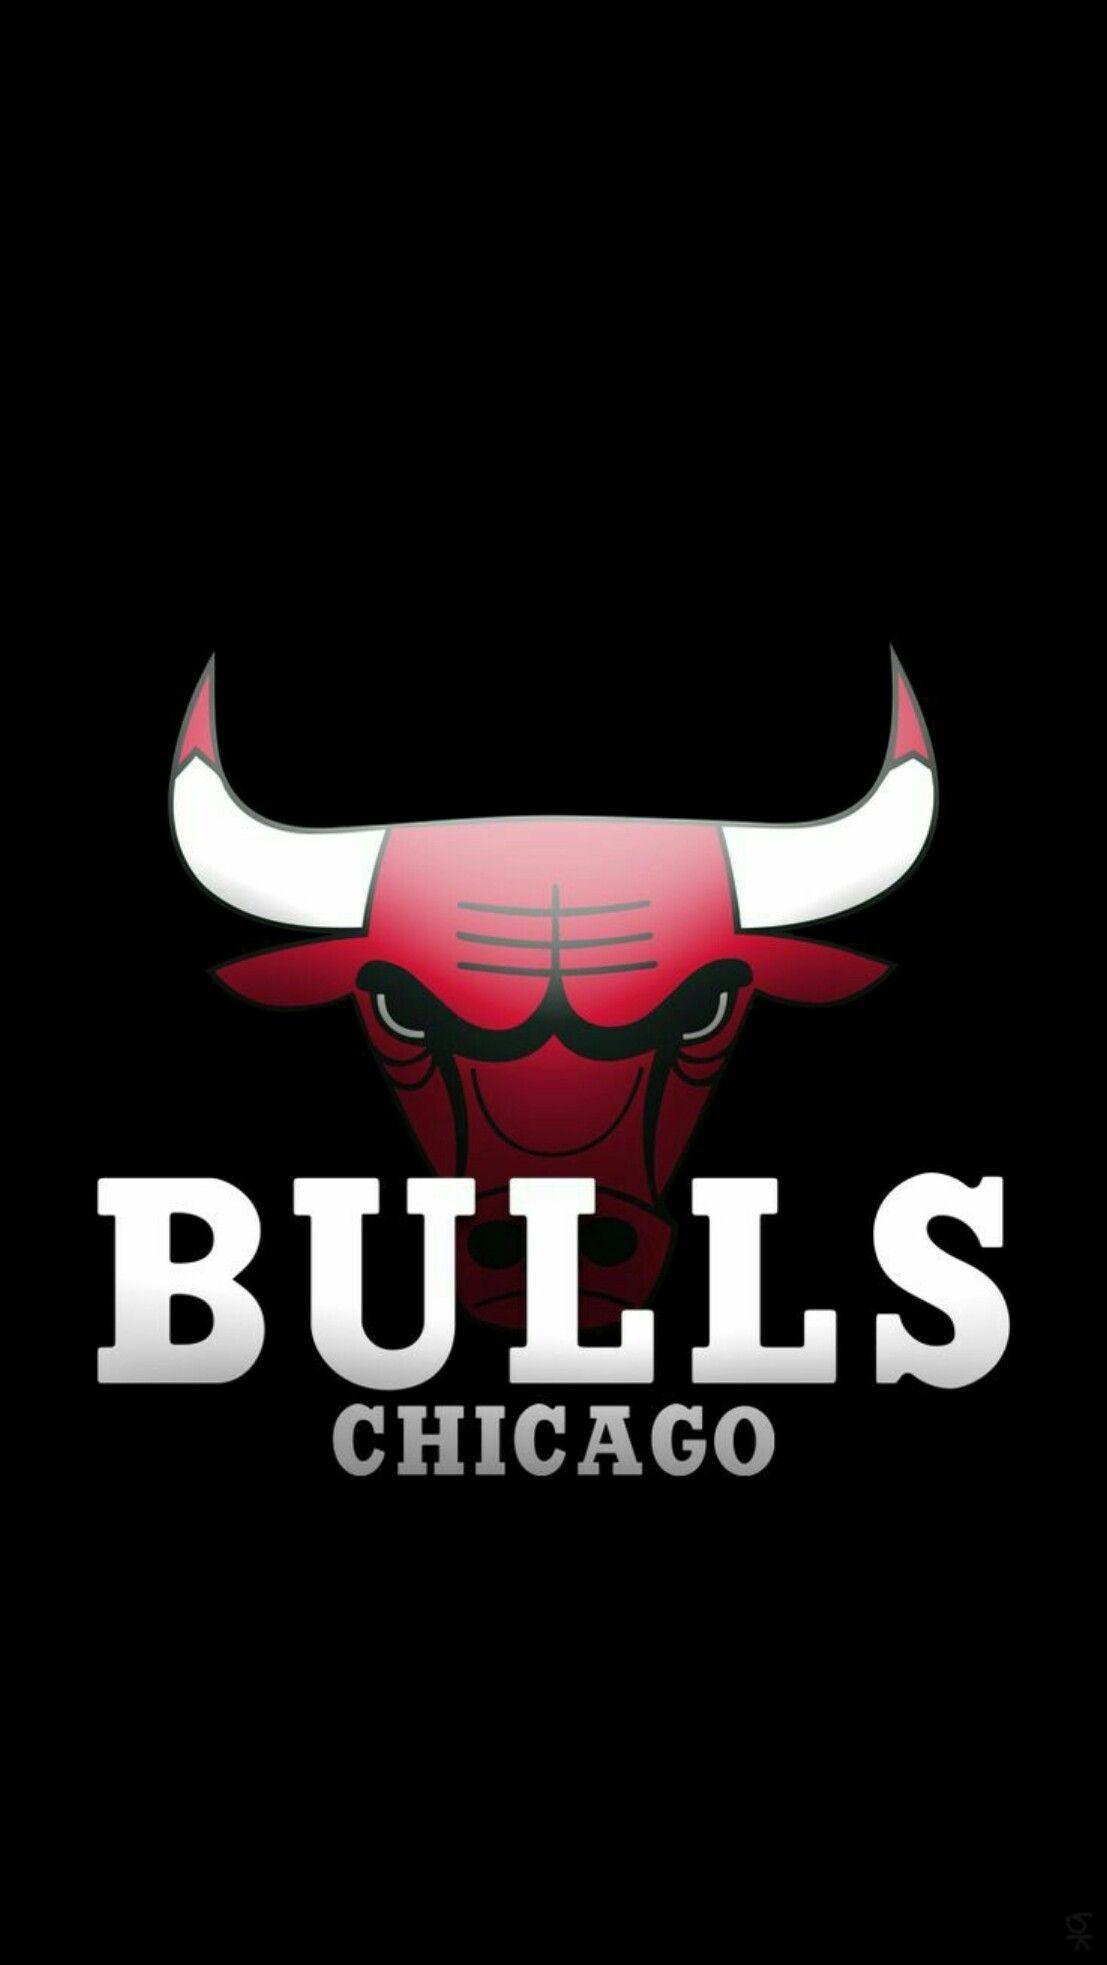 Chicago Bulls Wallpaper HD background picture